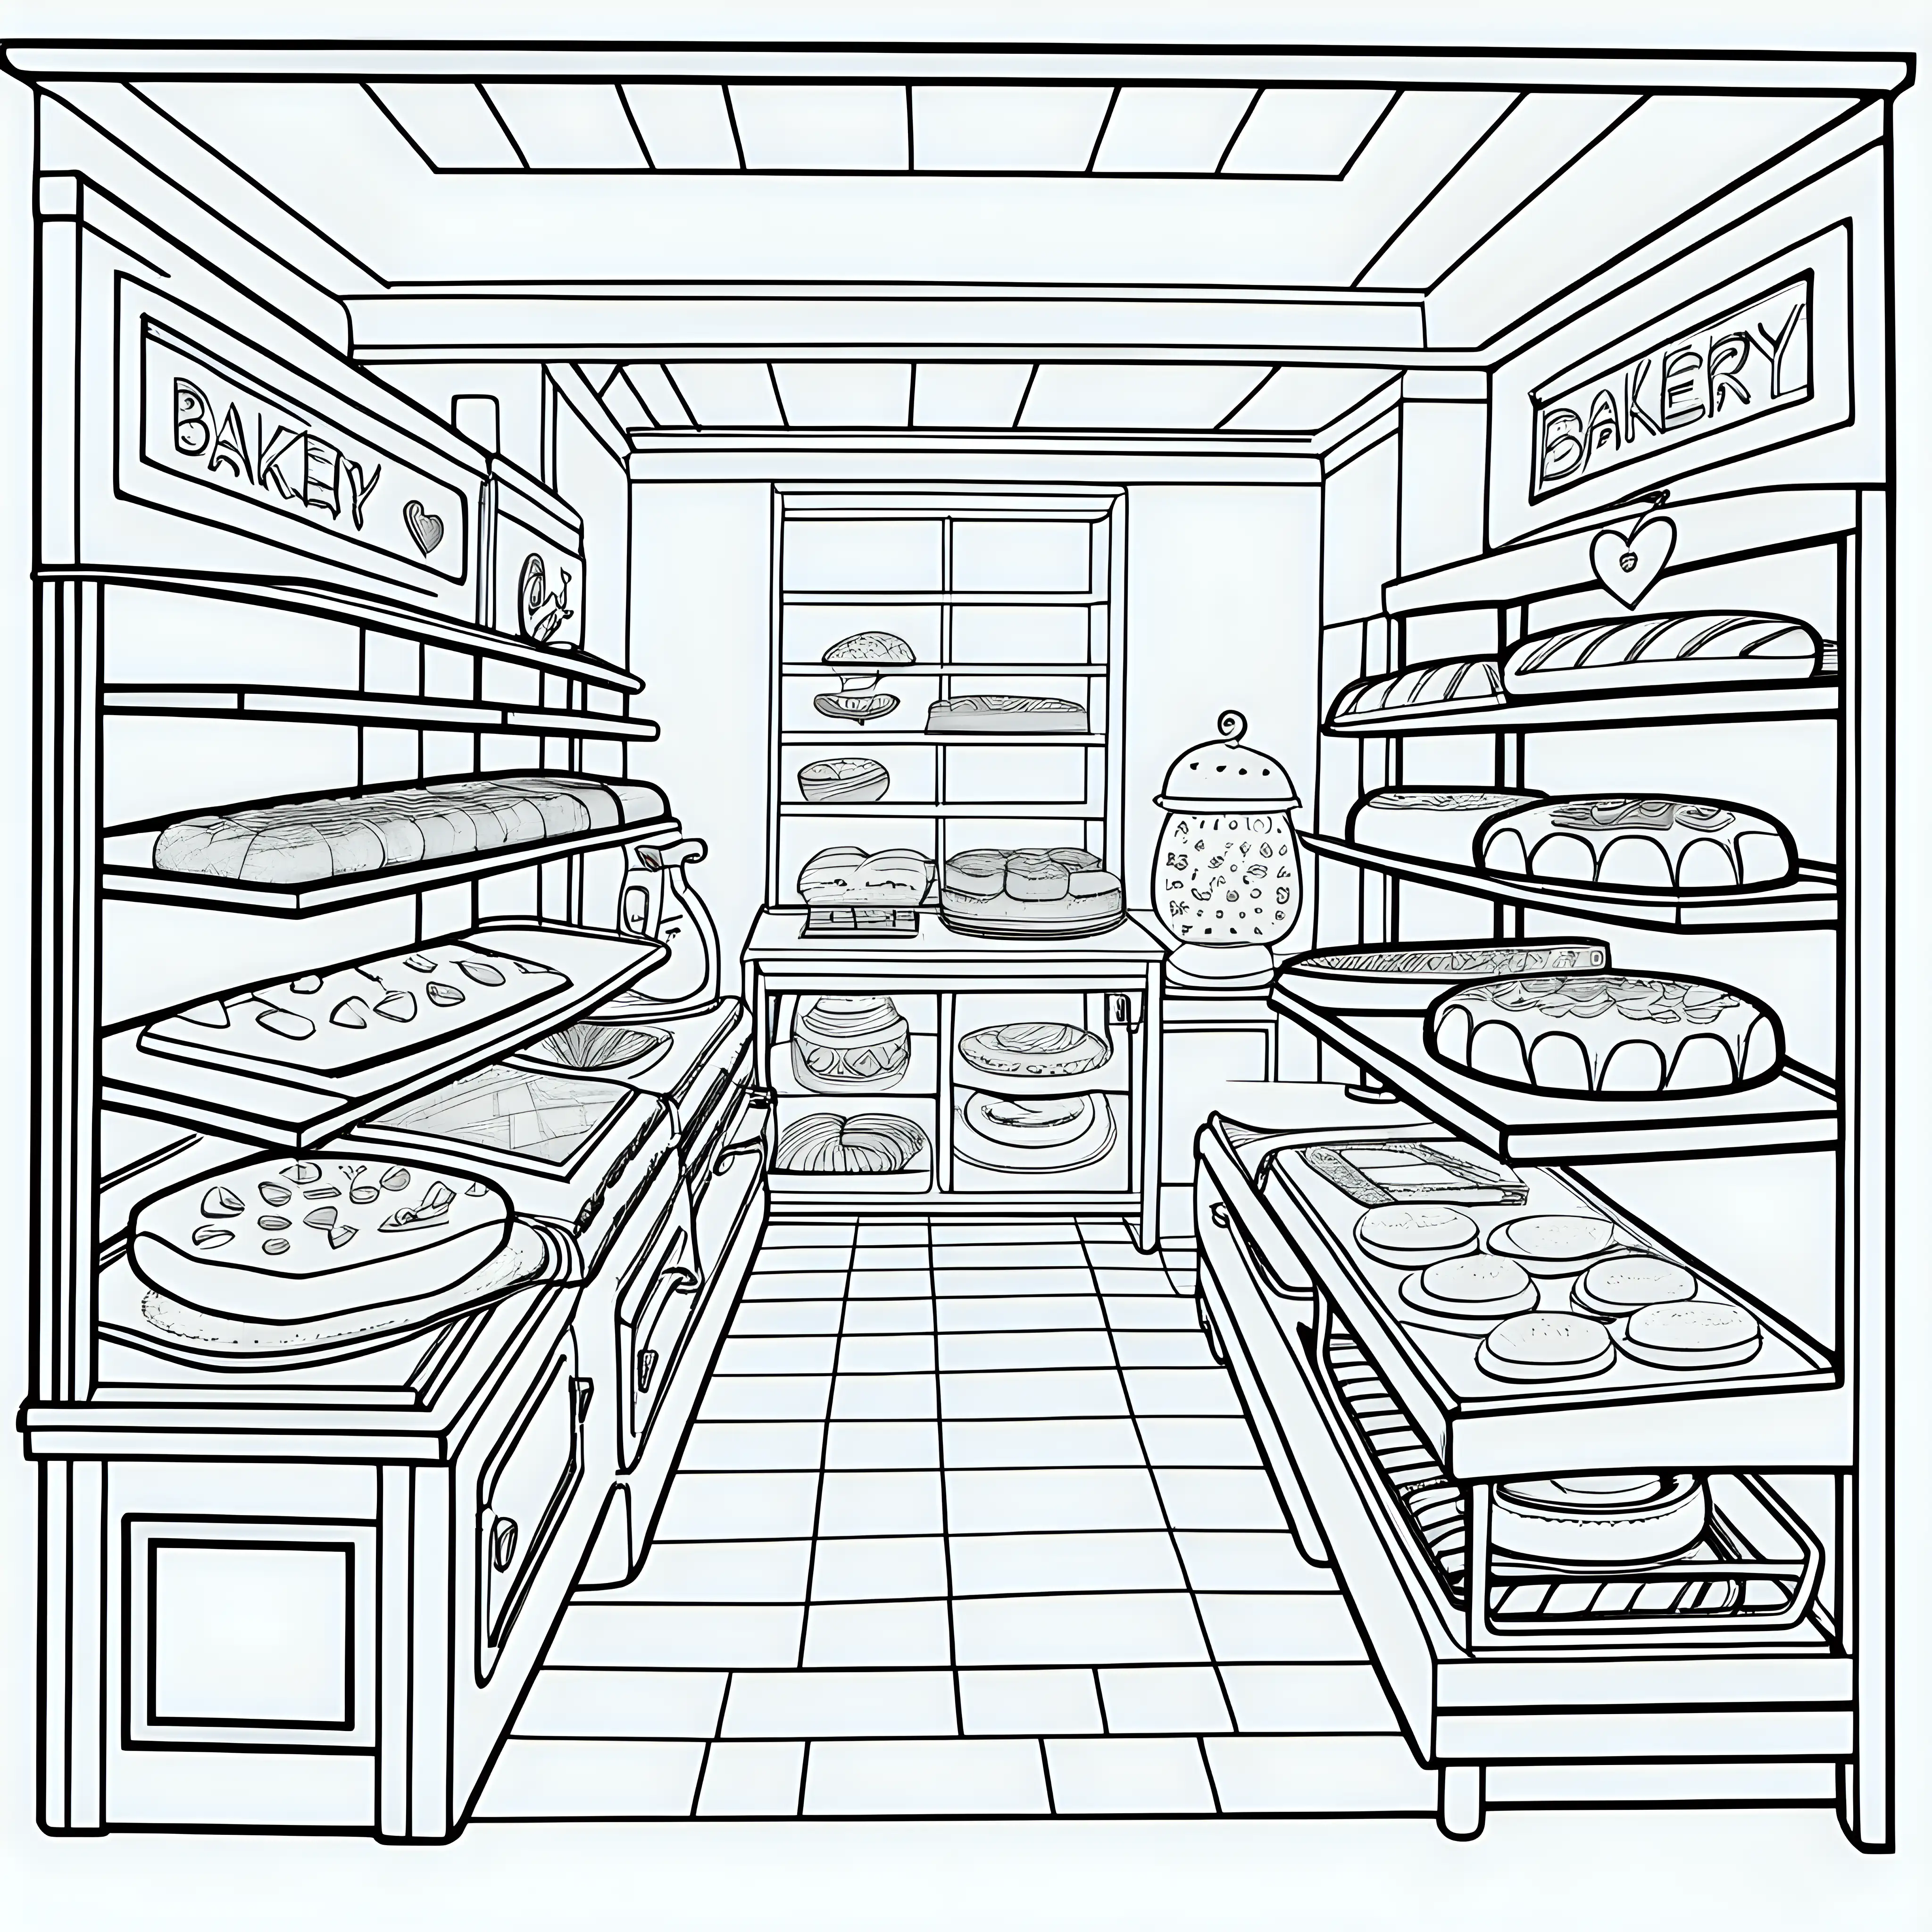 Valentines Day Bakery Coloring Page for Kids Whimsical Baking Fun